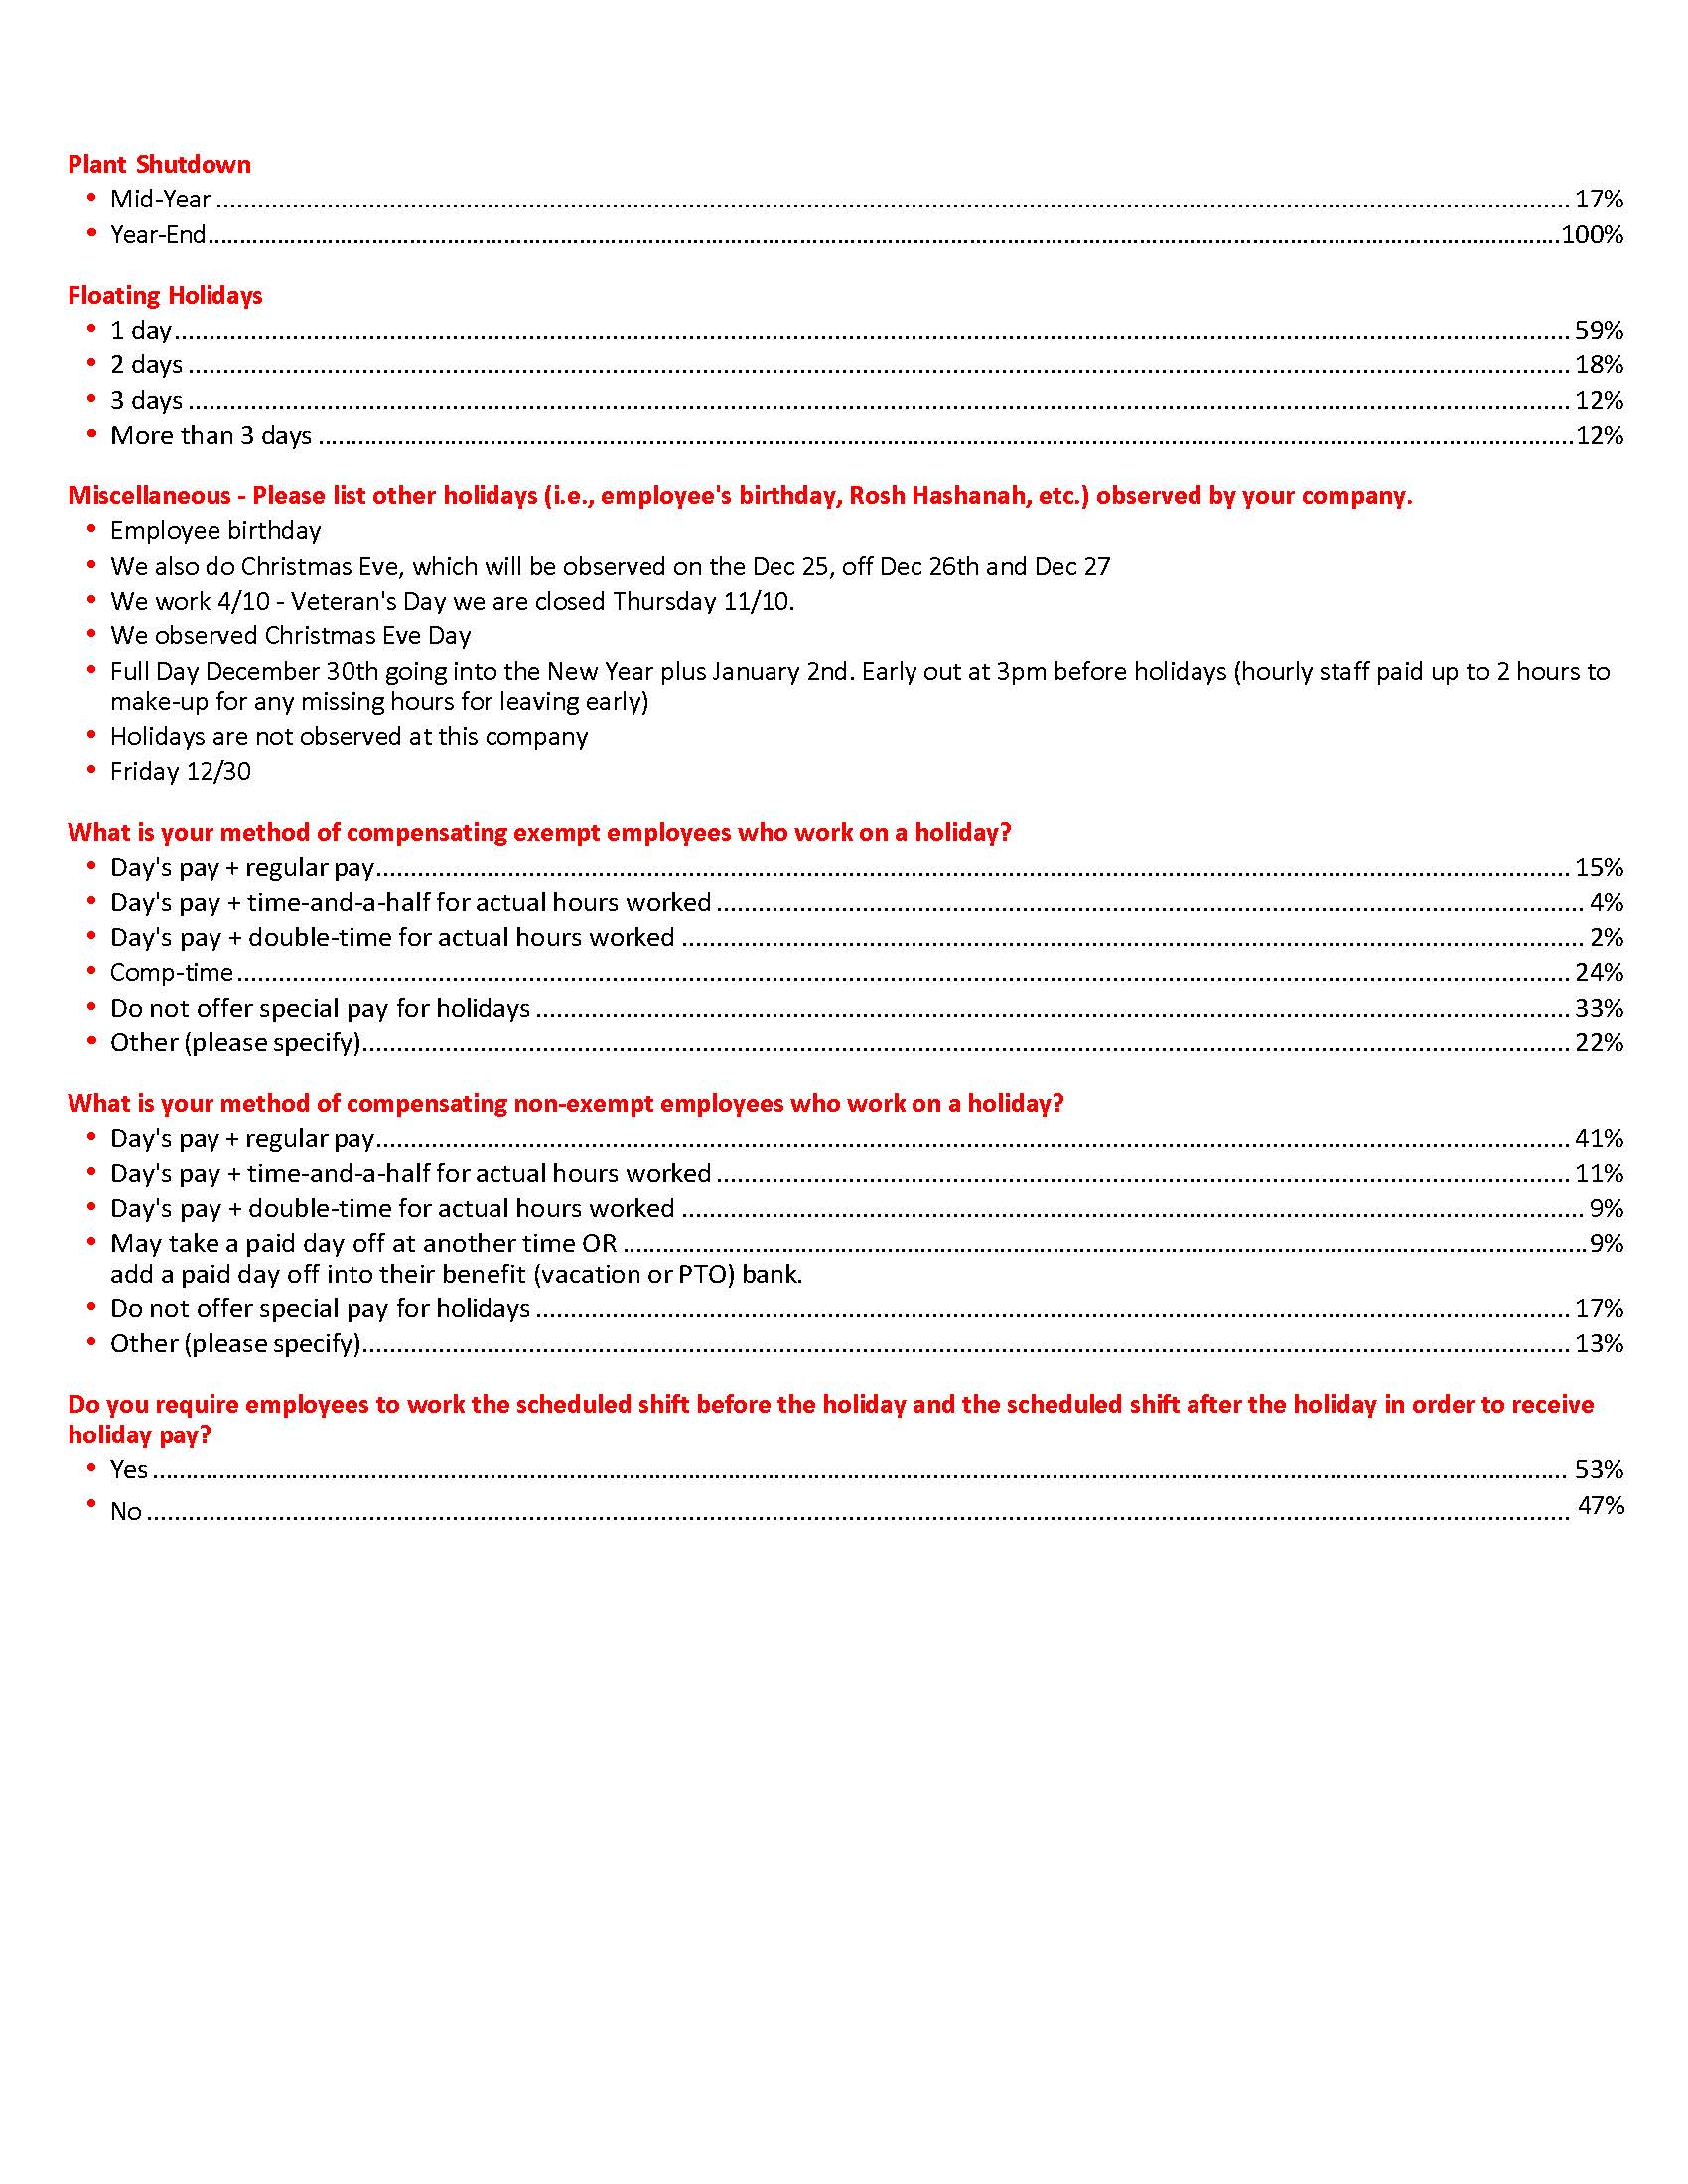 Holiday Survey Results 2023w Page 2 1 